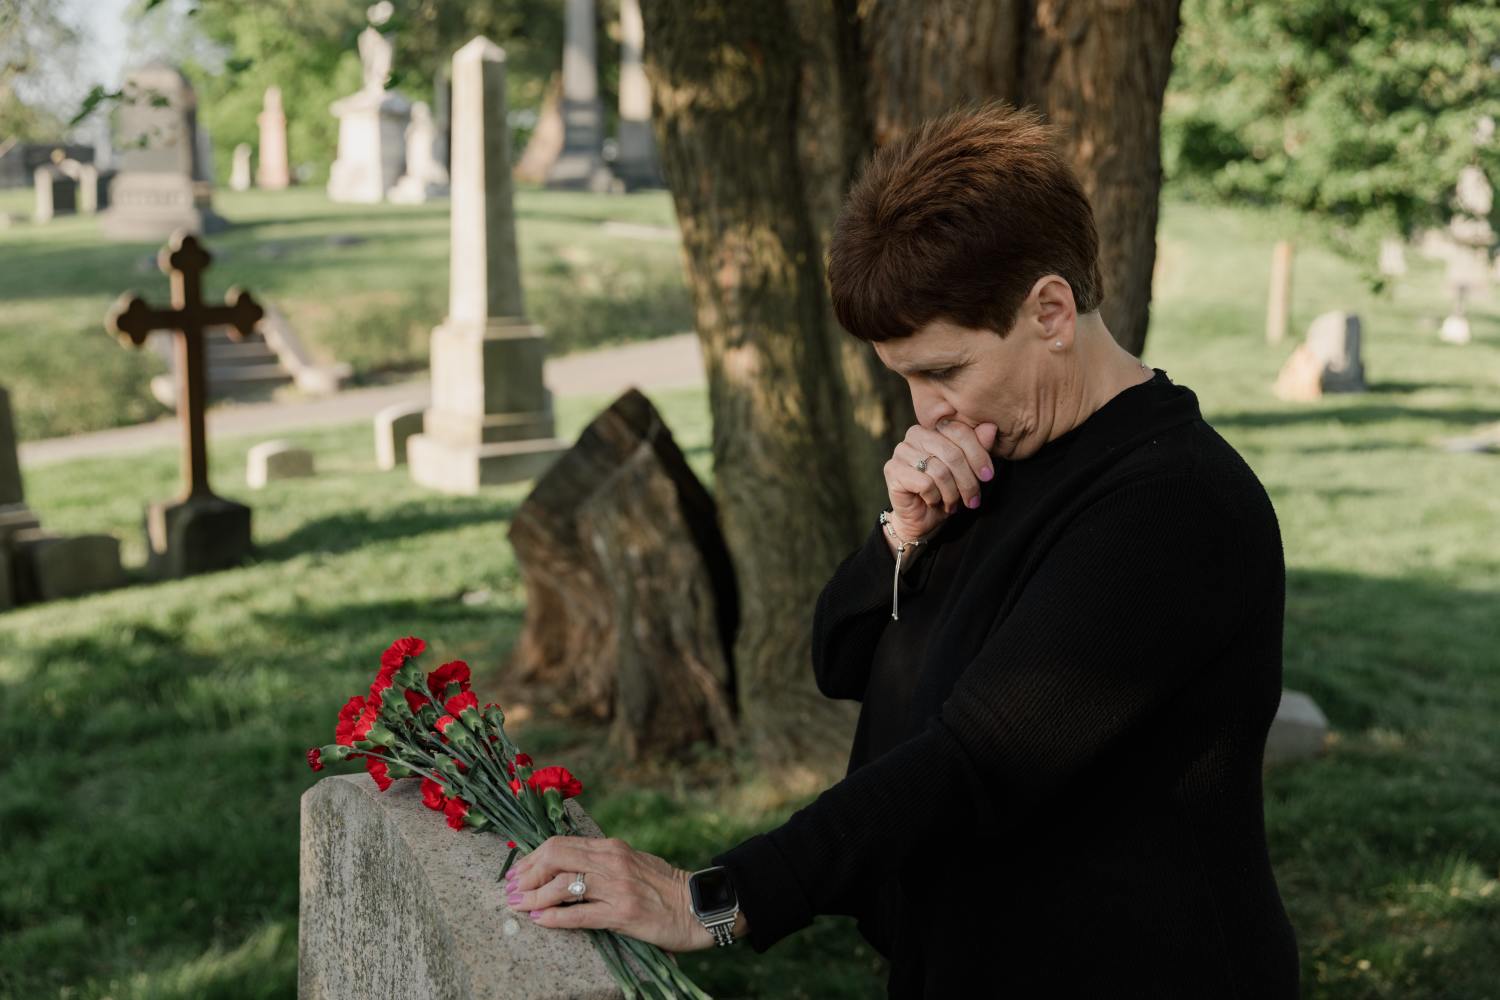 Woman at grave, thinking about responsibilities like how to claim life insurance benefits after death.